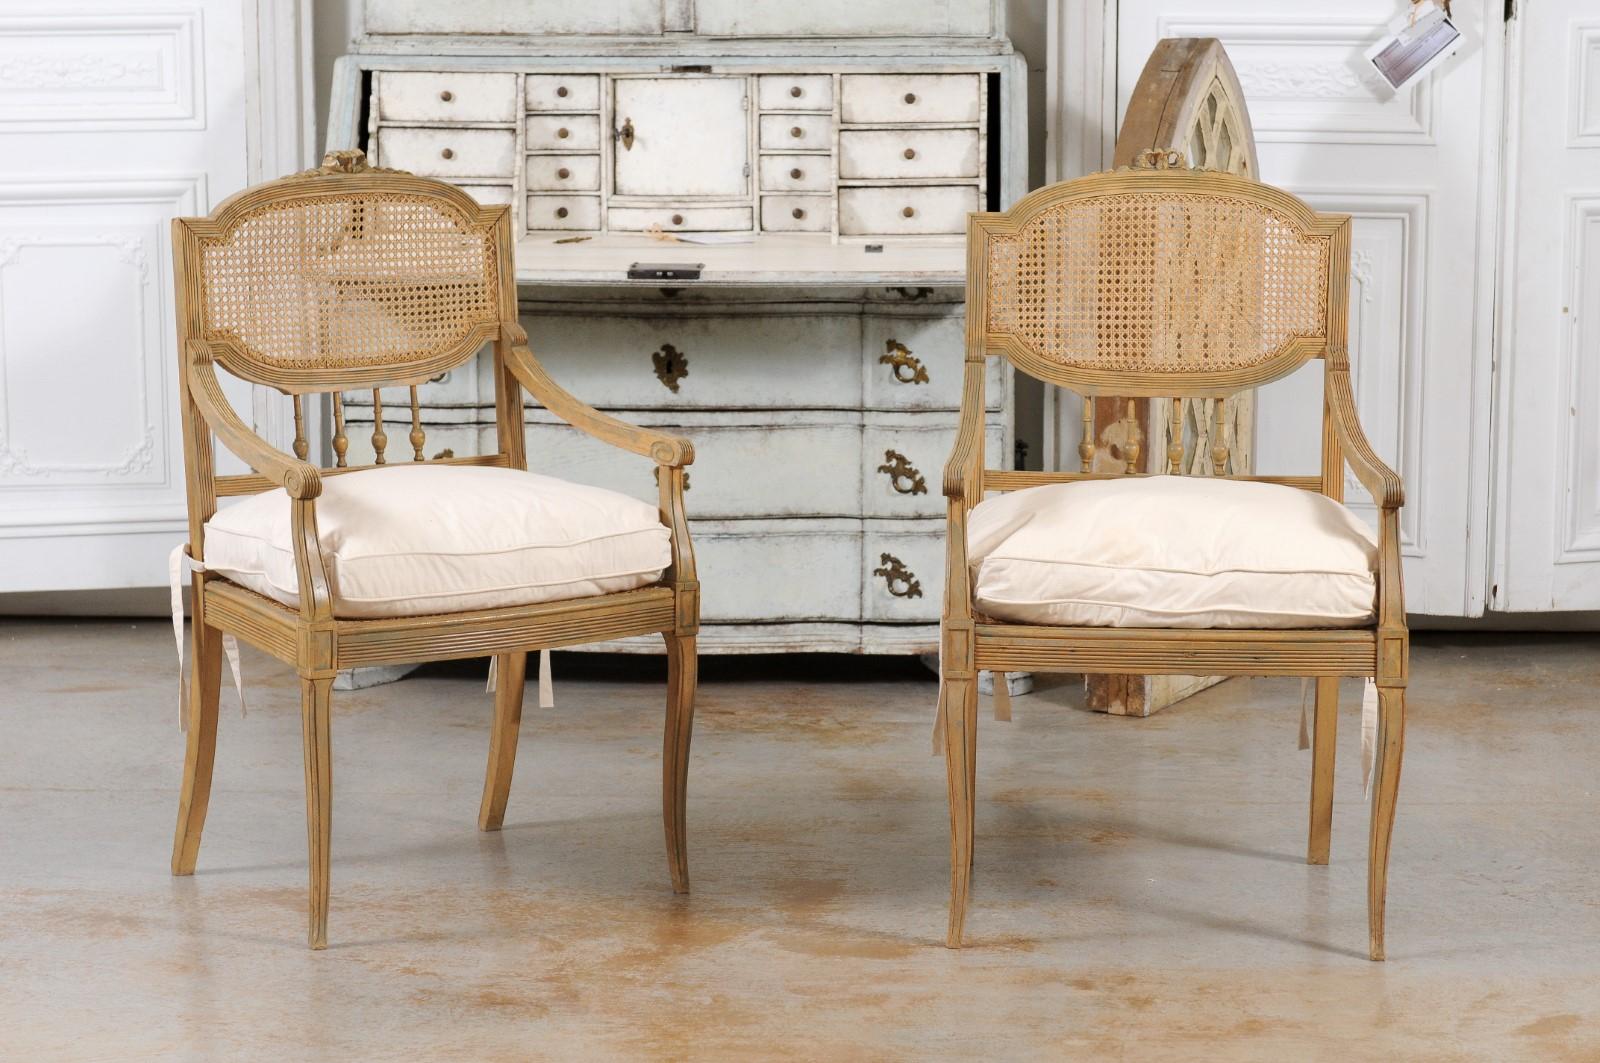 A pair of French wood and cane armchairs from the 19th century, with new custom cushions. Created in France during the 19th century, each of this pair of chairs features a cane back topped with a carved ribbon and adorned with thin spindles in the